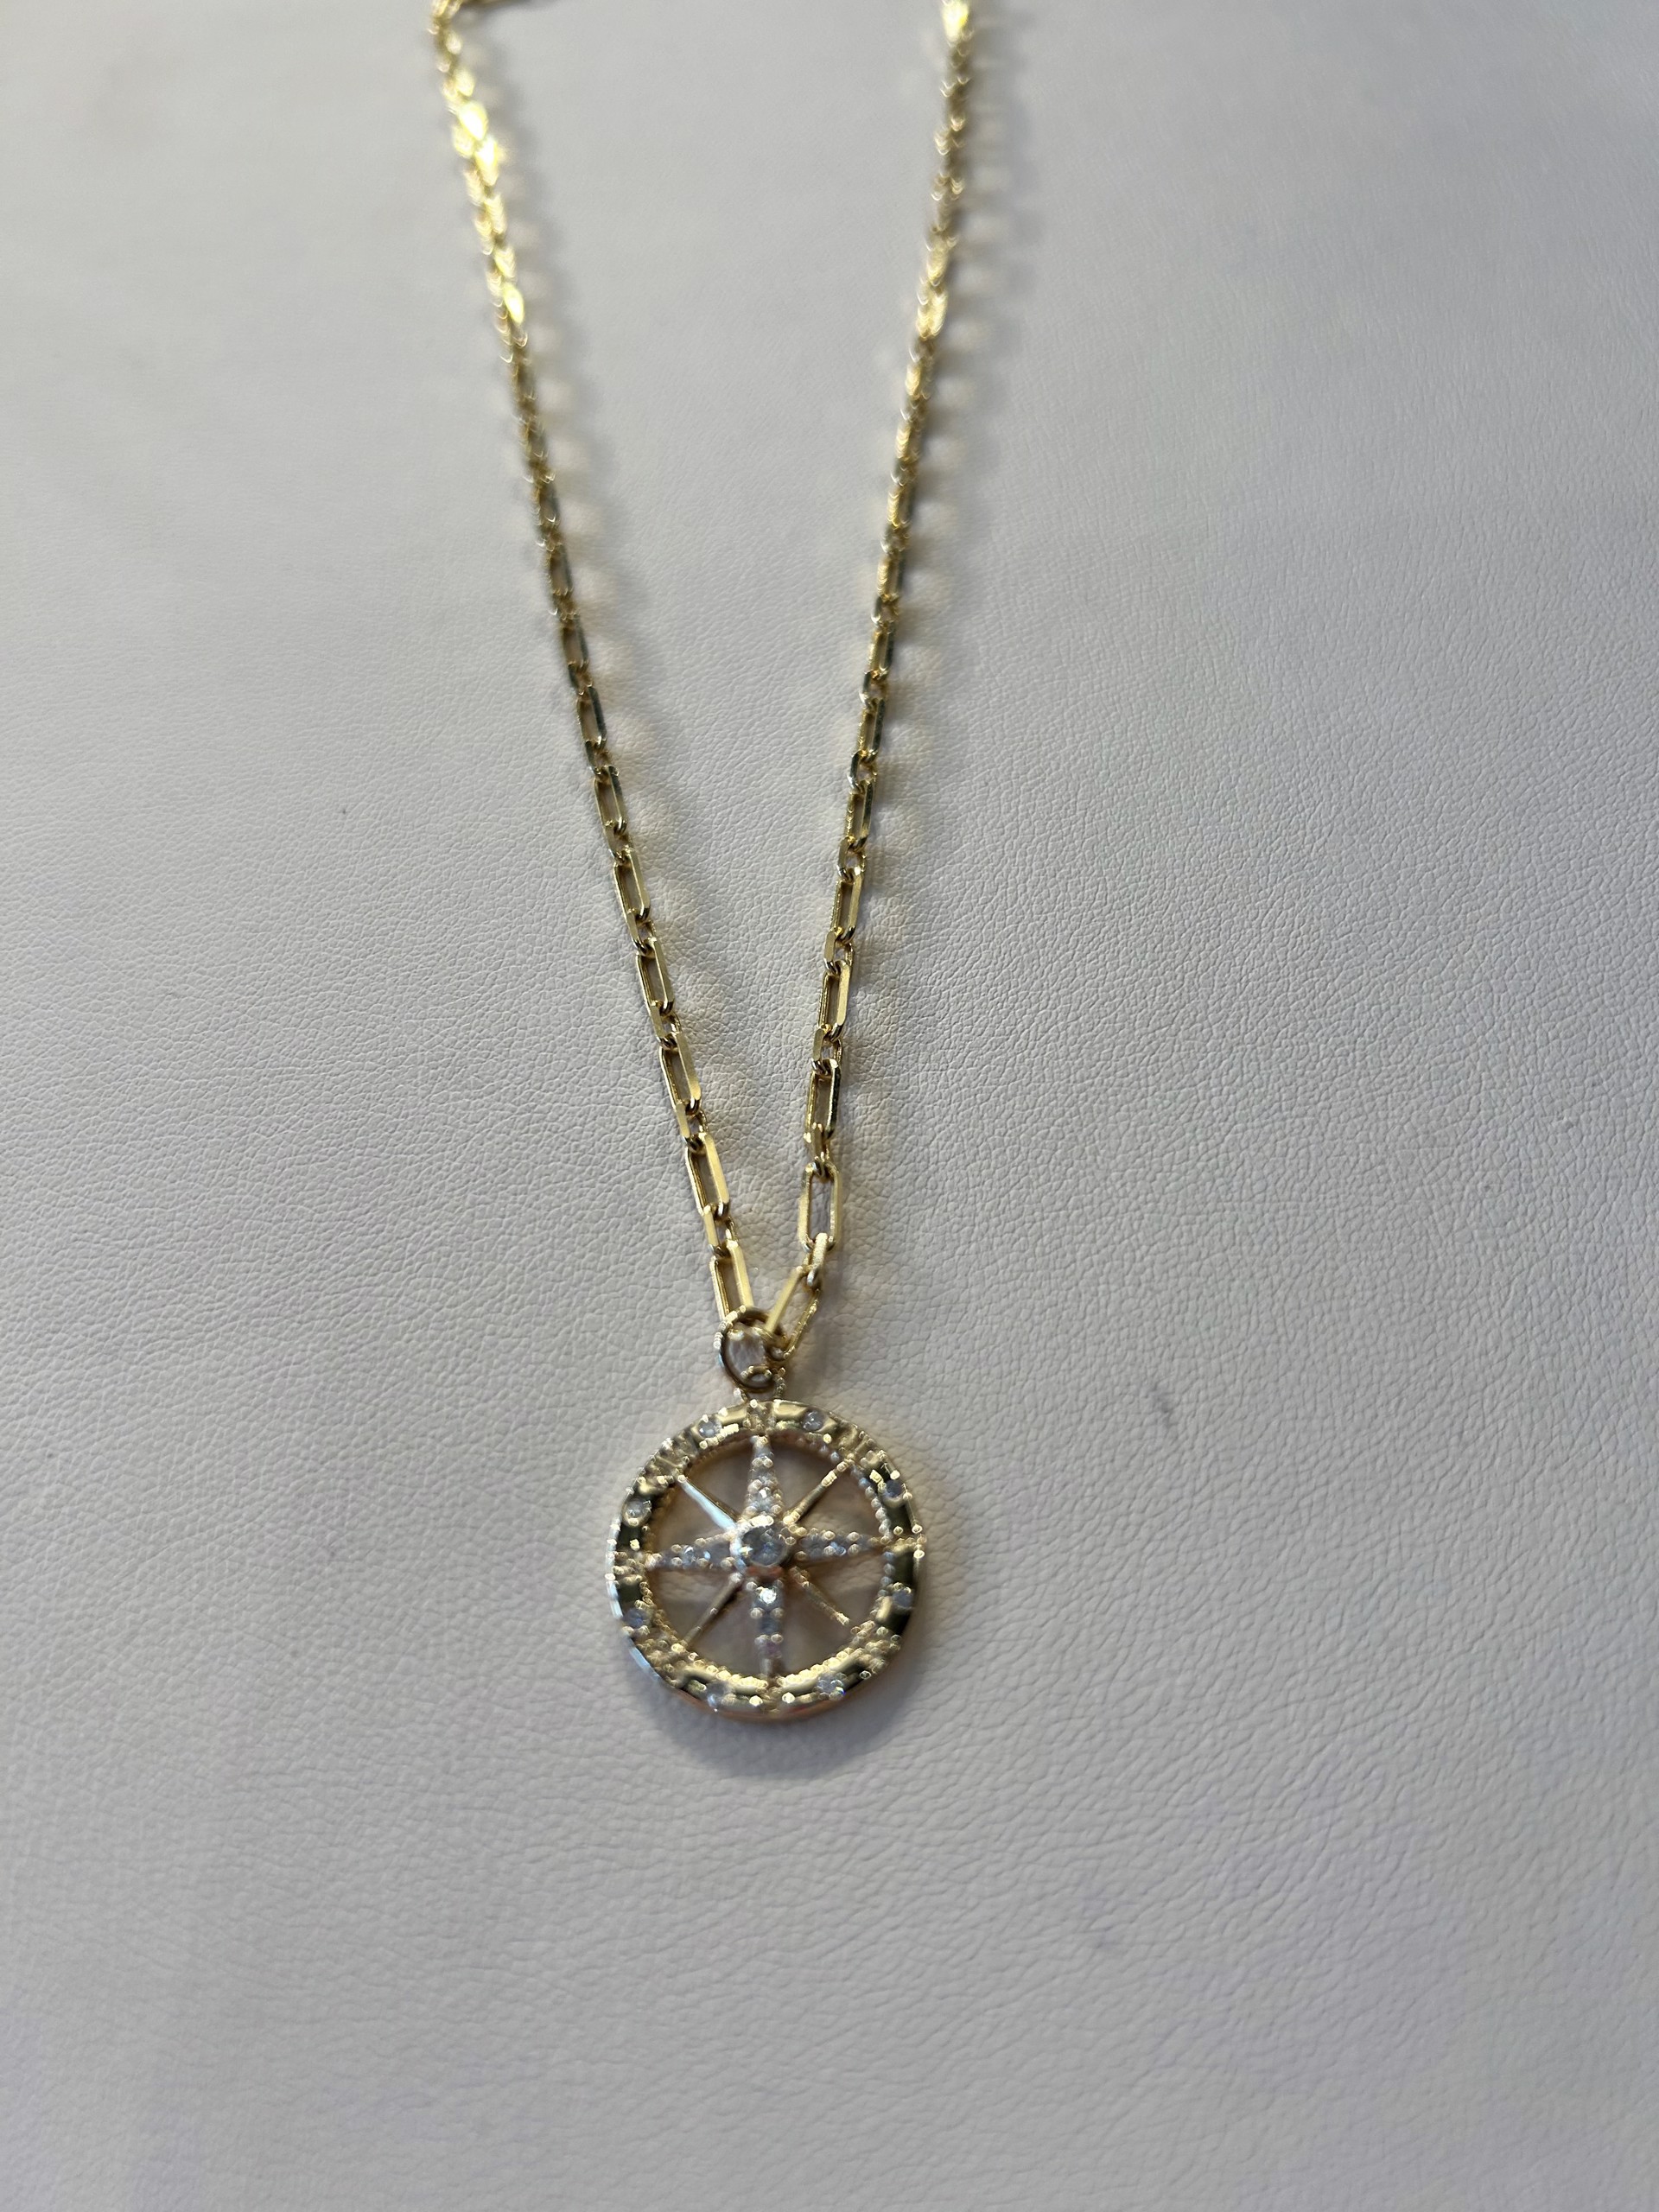 KB-N13 14K Gold Necklace with Diamond Compass by Karen Birchmier